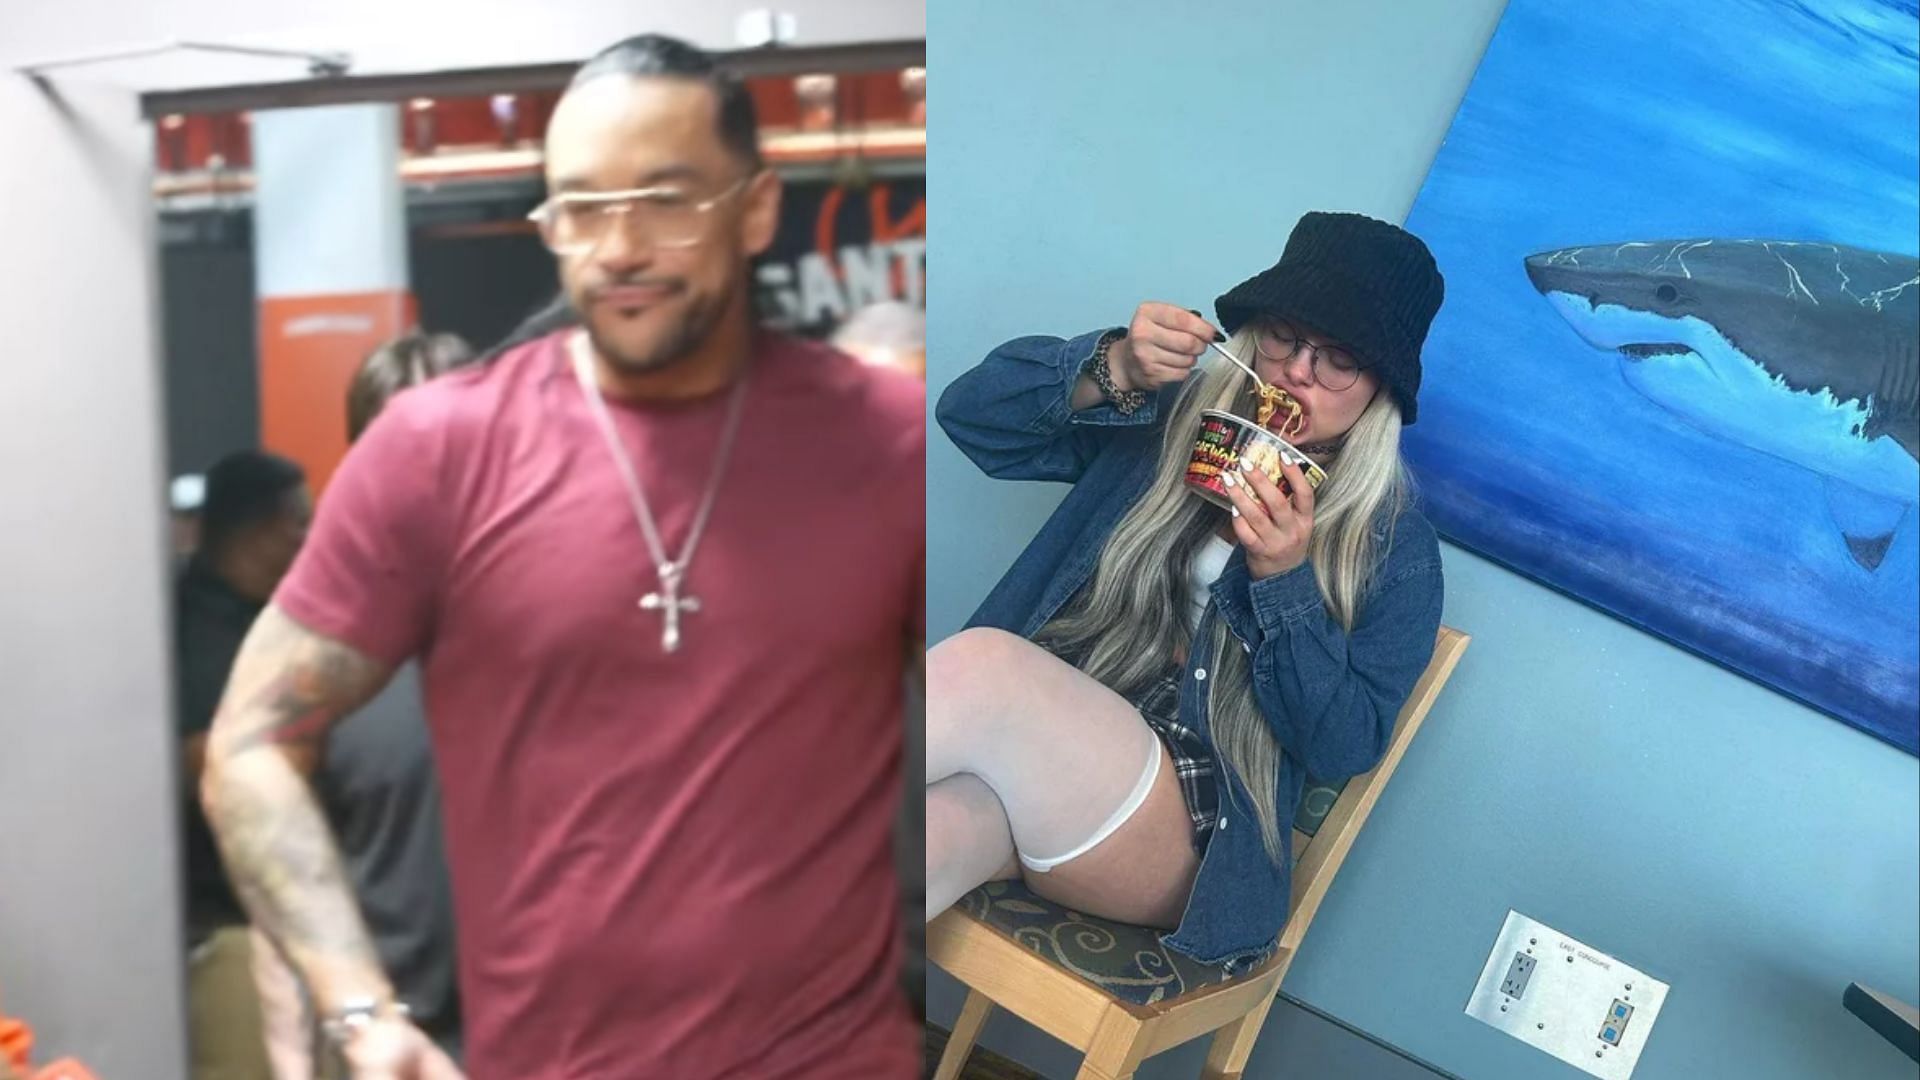 Damian Priest and Liv Morgan were seen accompanying the star over the weekend